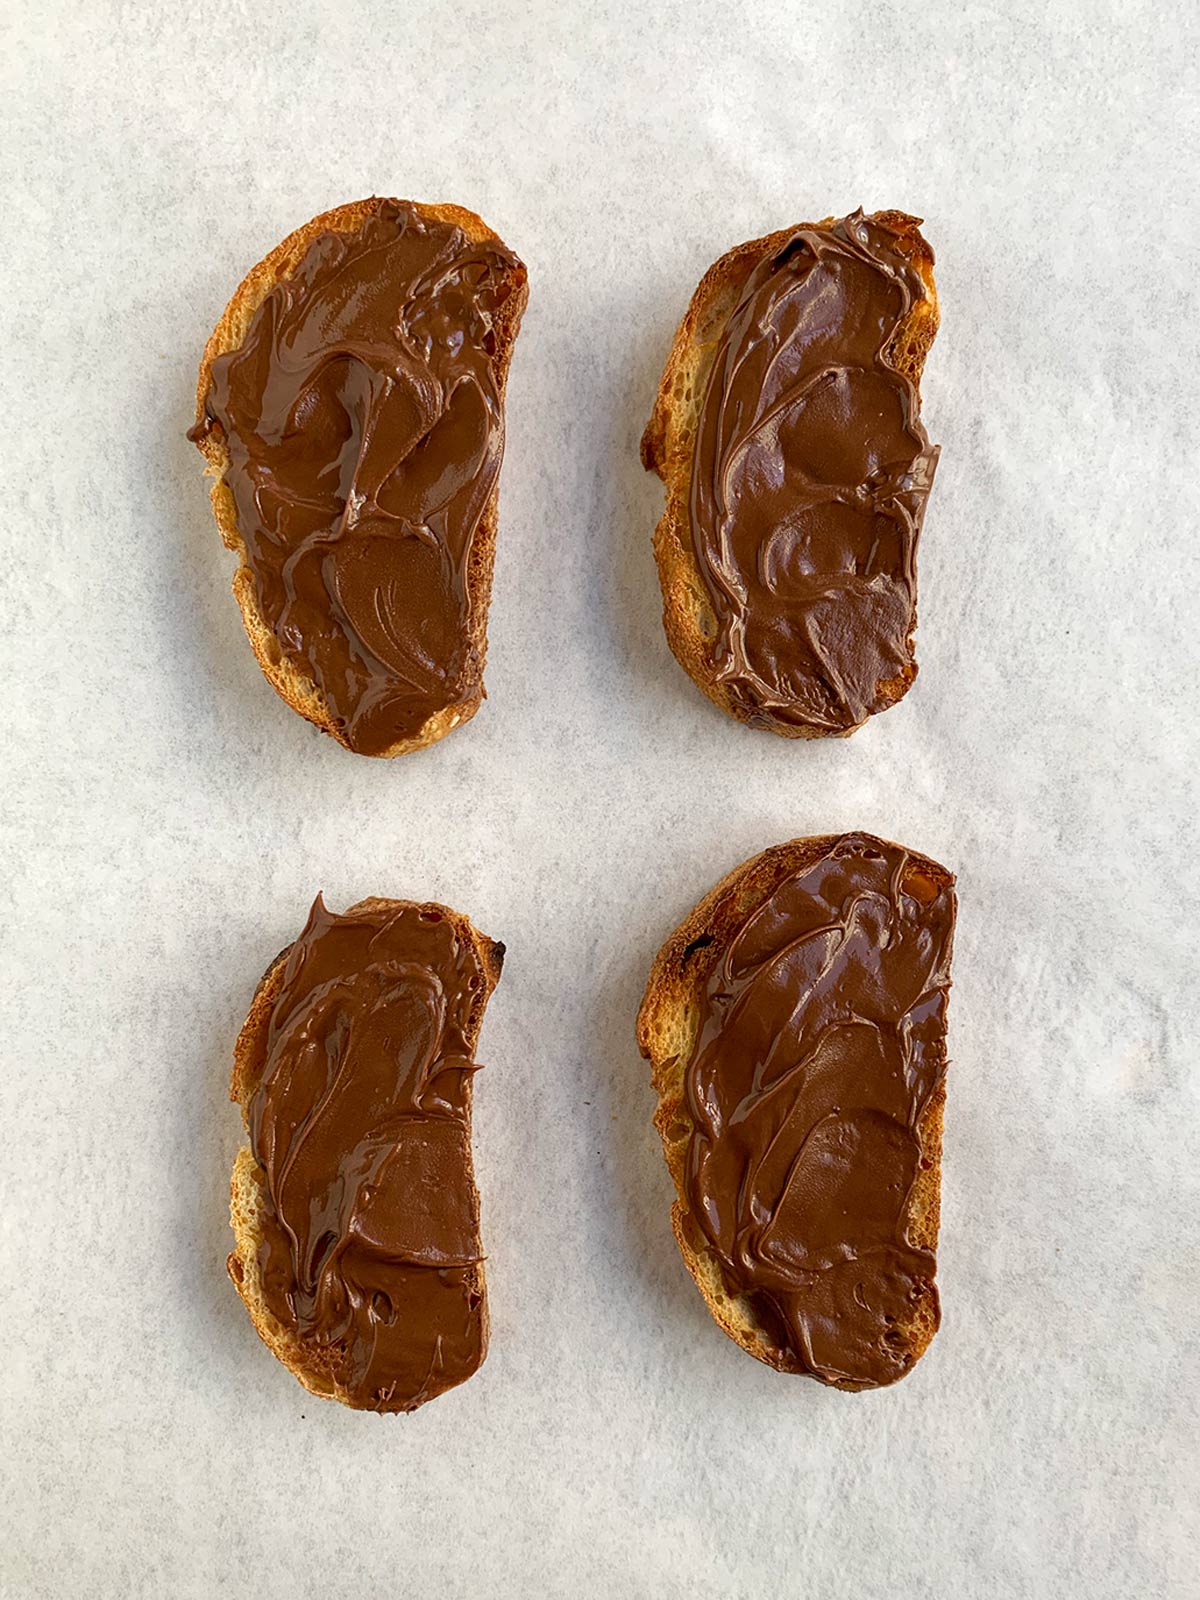 4 slices of mini toasts with nutella spread on top.